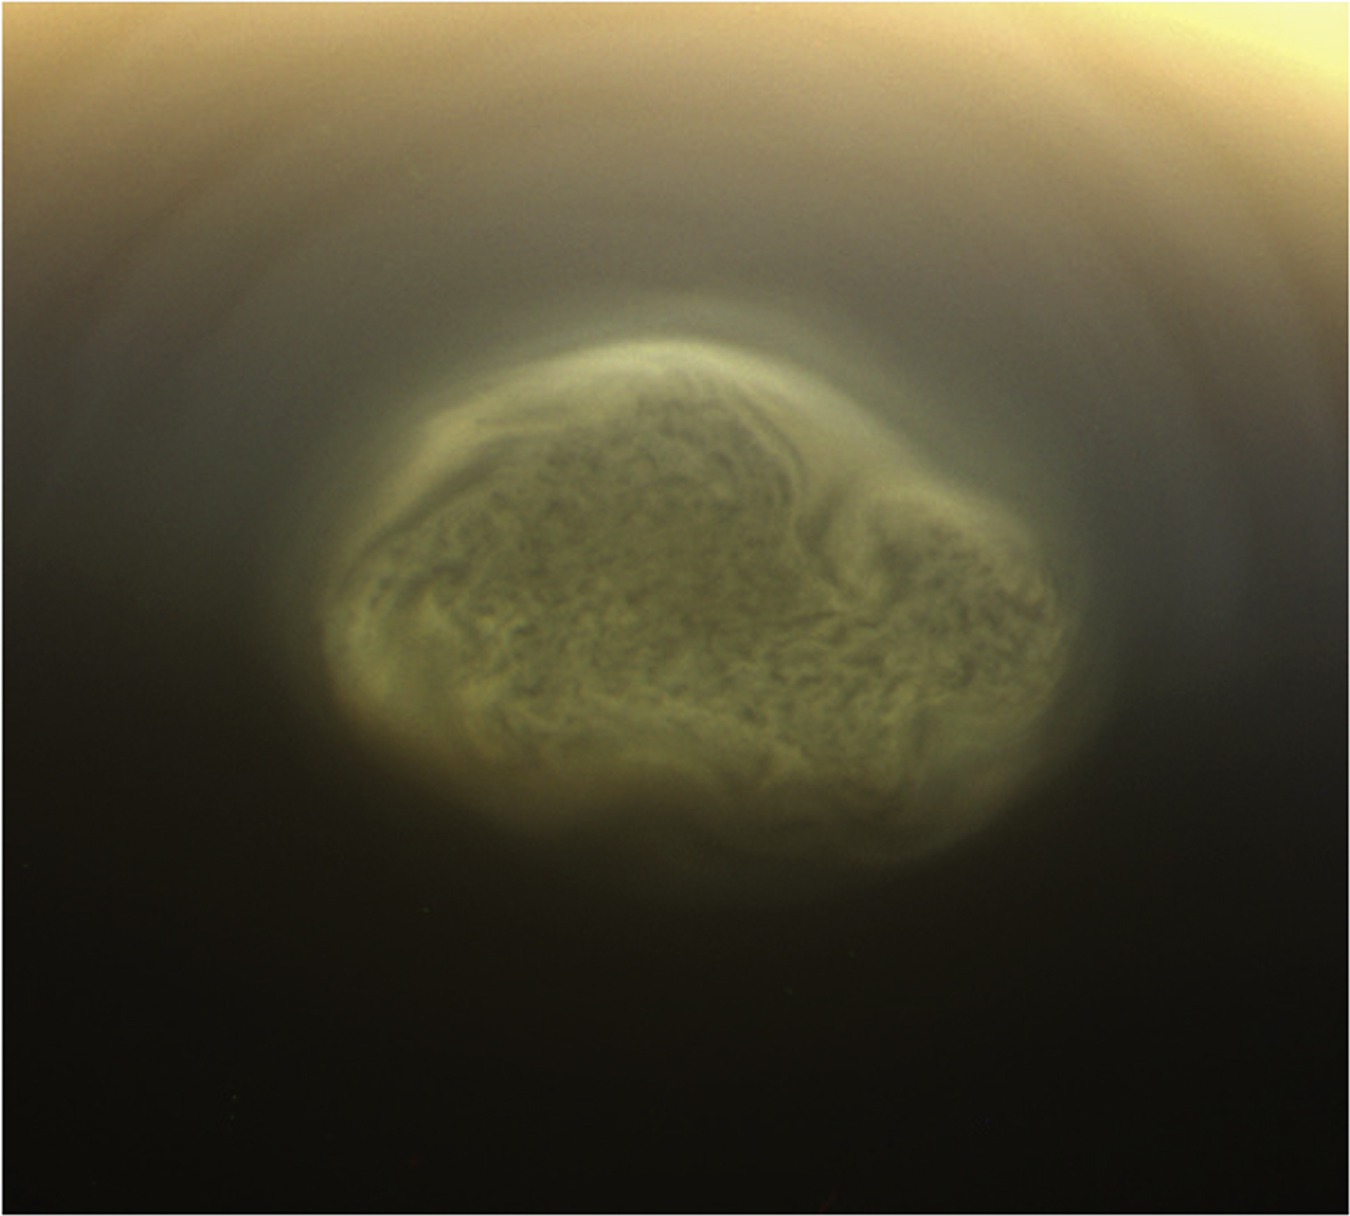 Southern polar vortex cloud, sized as larger as 480,000 km, in Titan imaged by Cassini in 2012. HCN ice/liquid has since been inferred to be a component of this cloud.                                          Image credit: NASA/JPL/Space Science Institute.